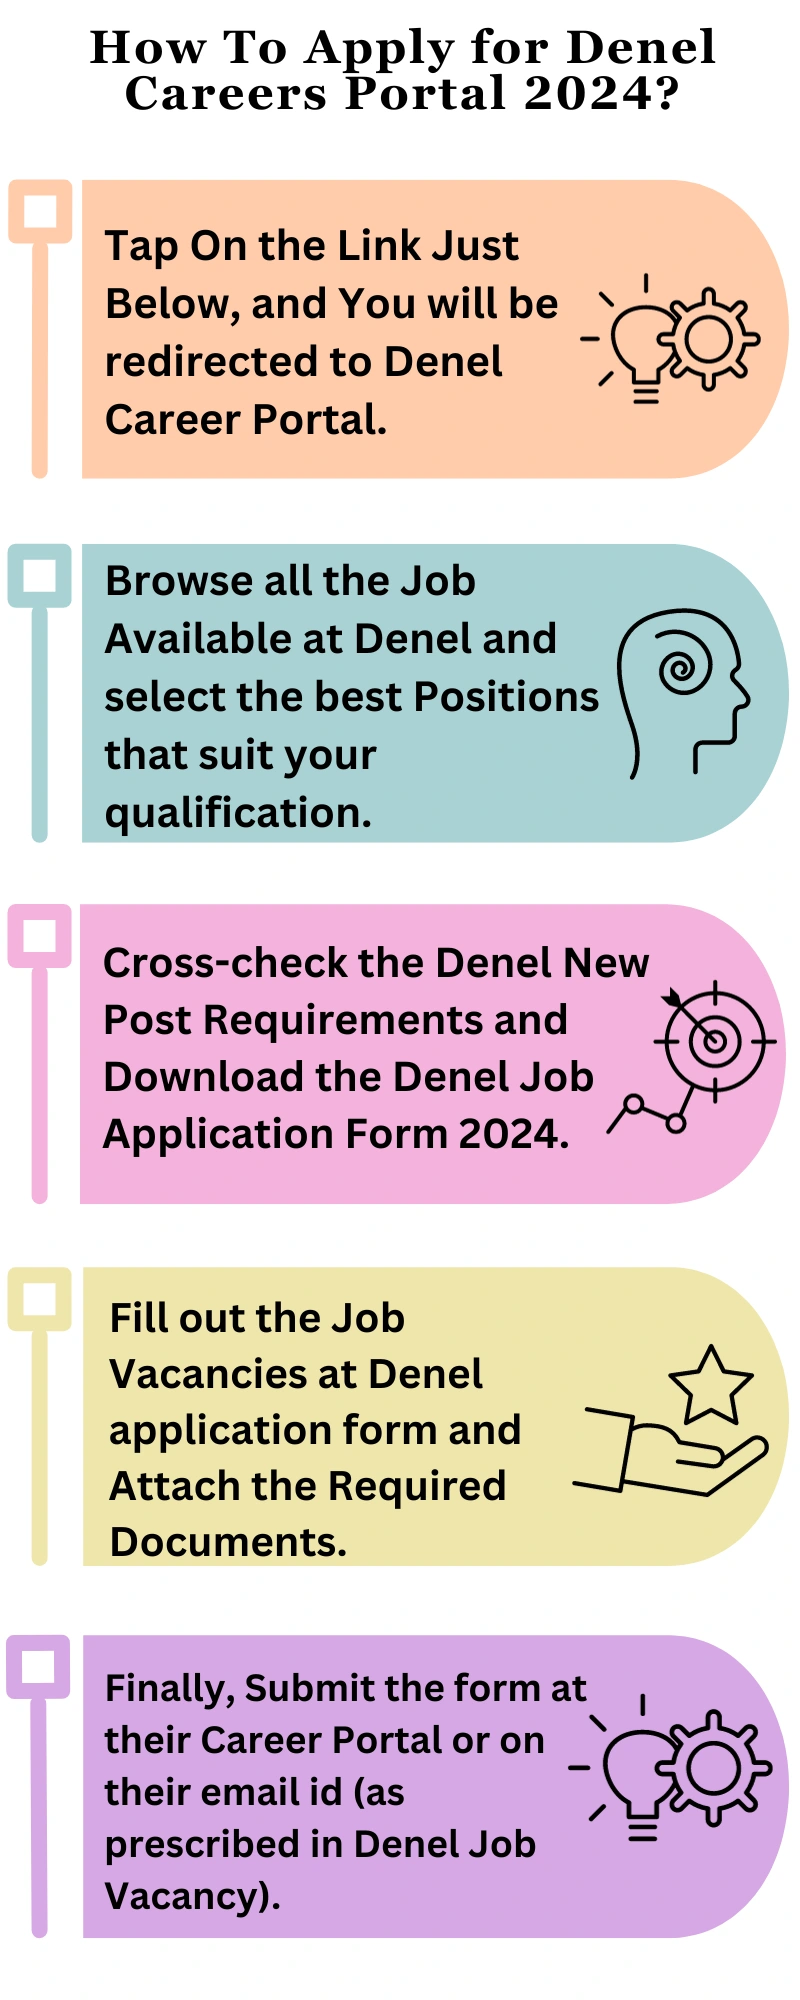 How To Apply for Denel Careers Portal 2024?